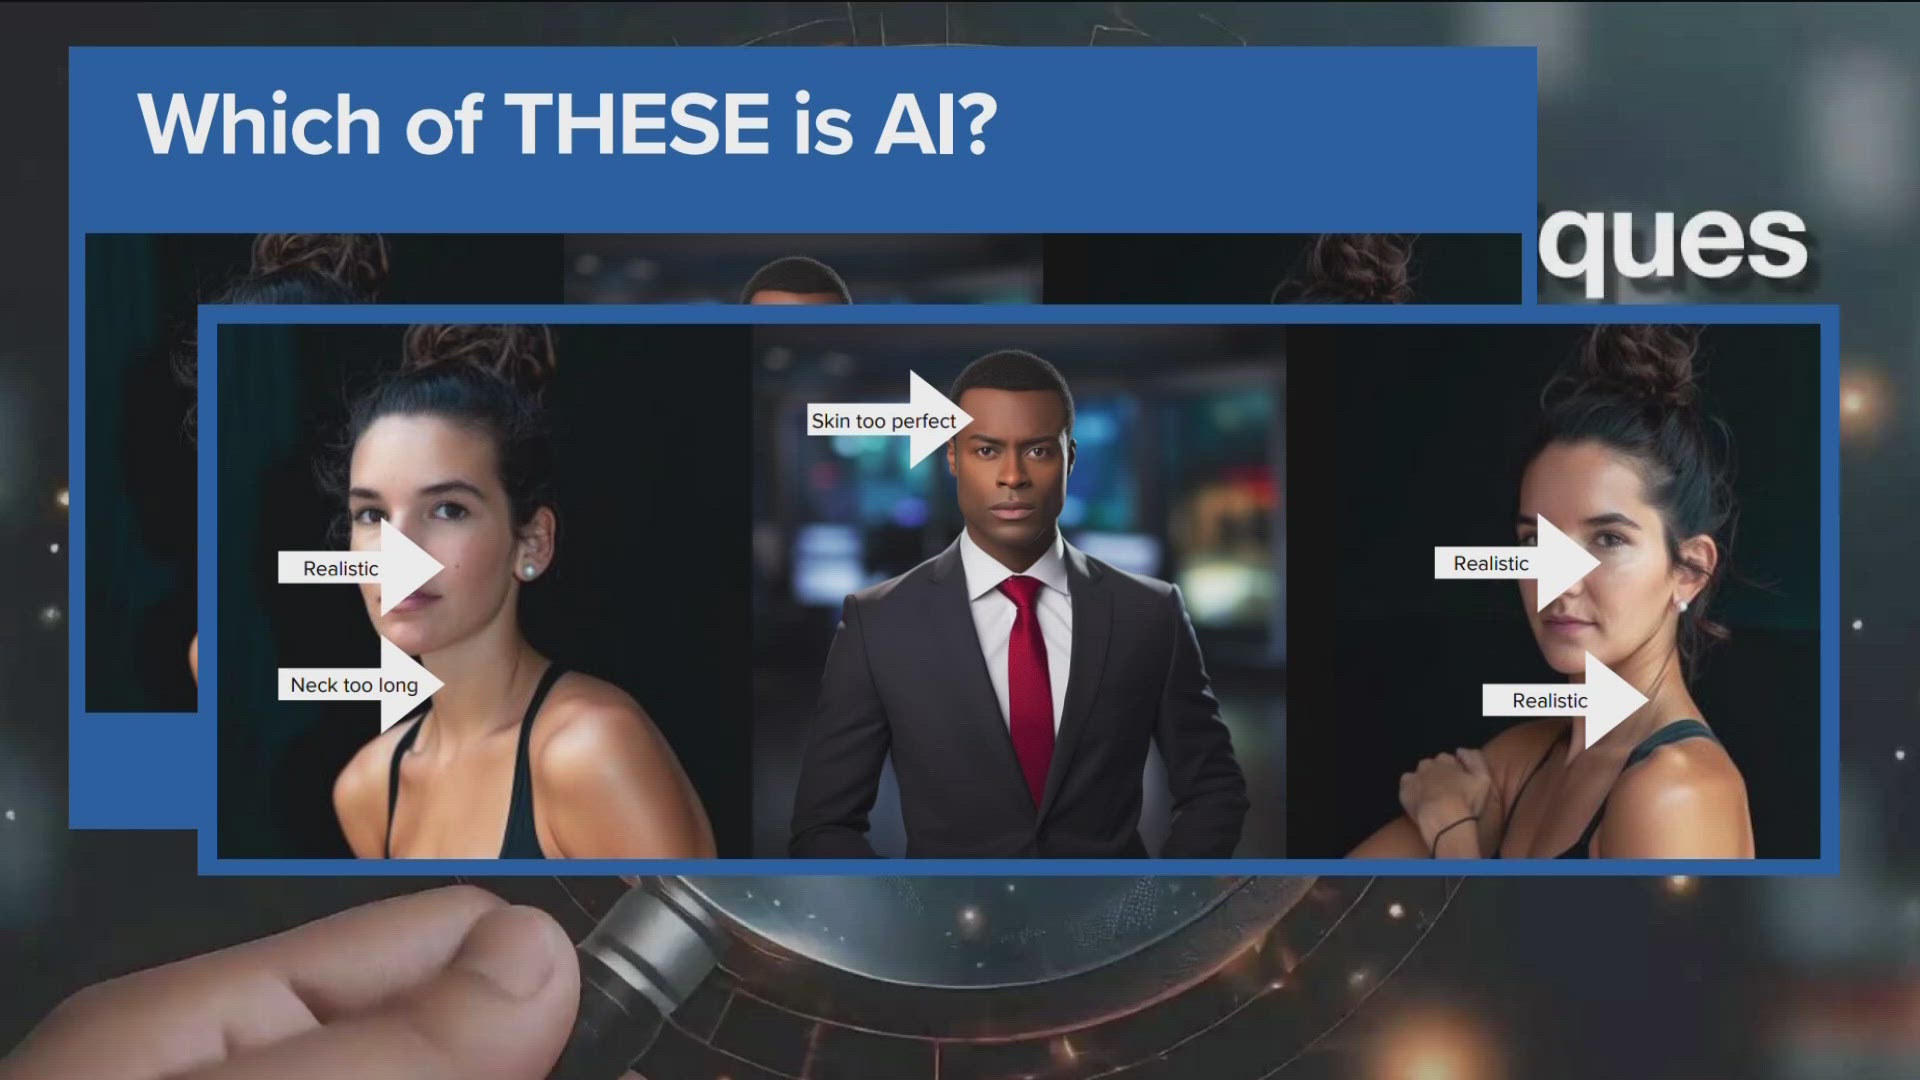 Most AI technology isn’t foolproof yet, but spotting deepfakes and other AI-generated content requires attention to detail and critical thinking.